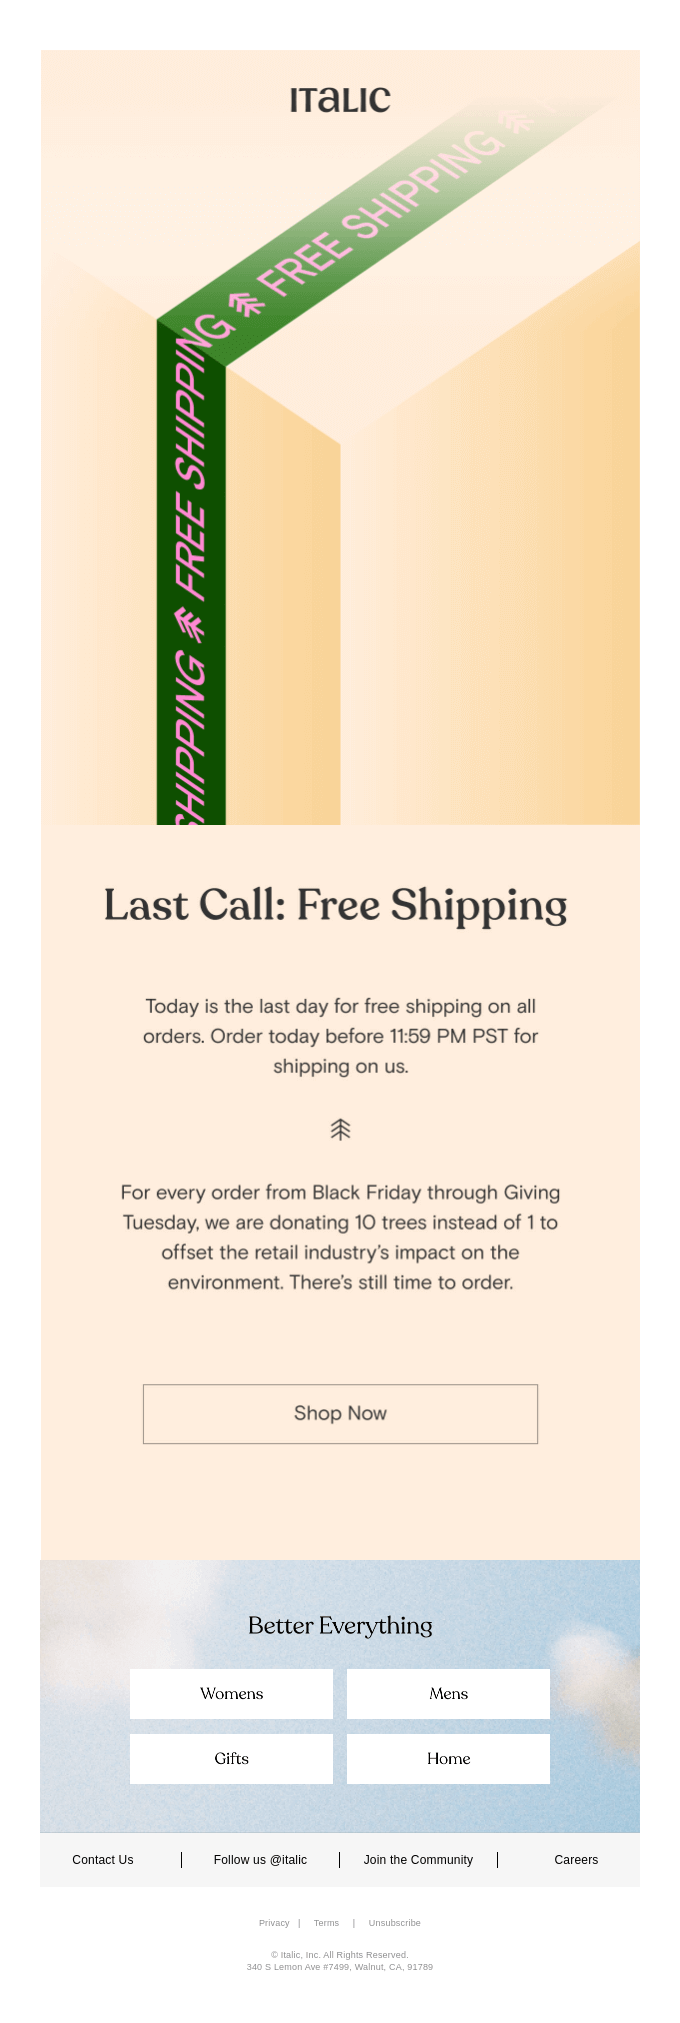 Last chance for free shipping email by Italic.